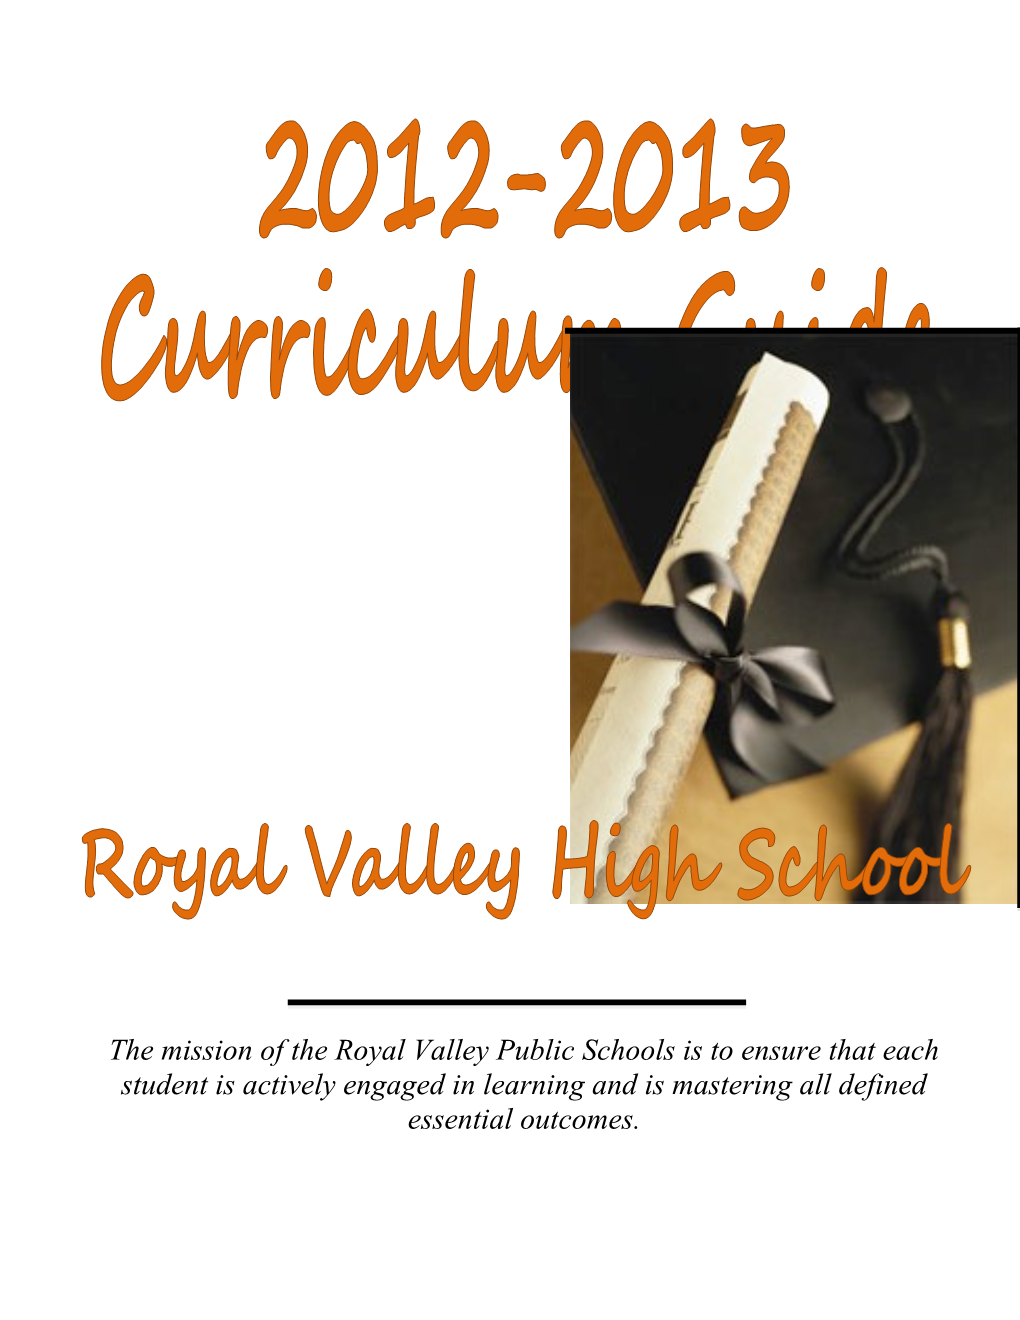 The Mission of the Royal Valley Public Schools Is to Ensure That Each Student Is Actively